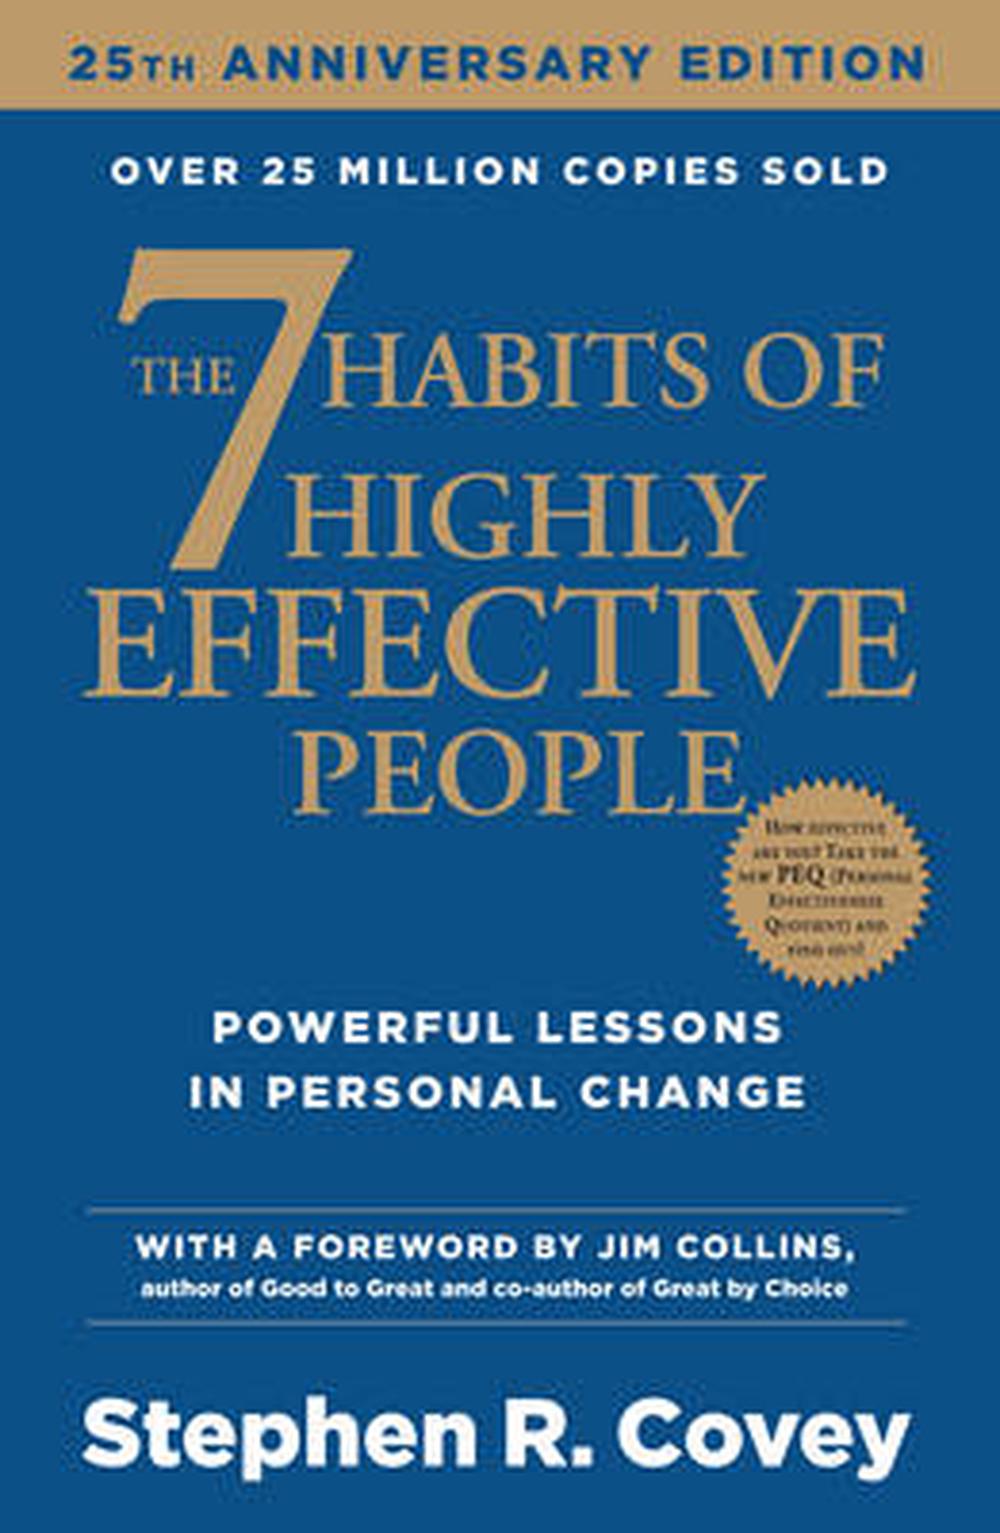 seven habits of highly effective people quadrants